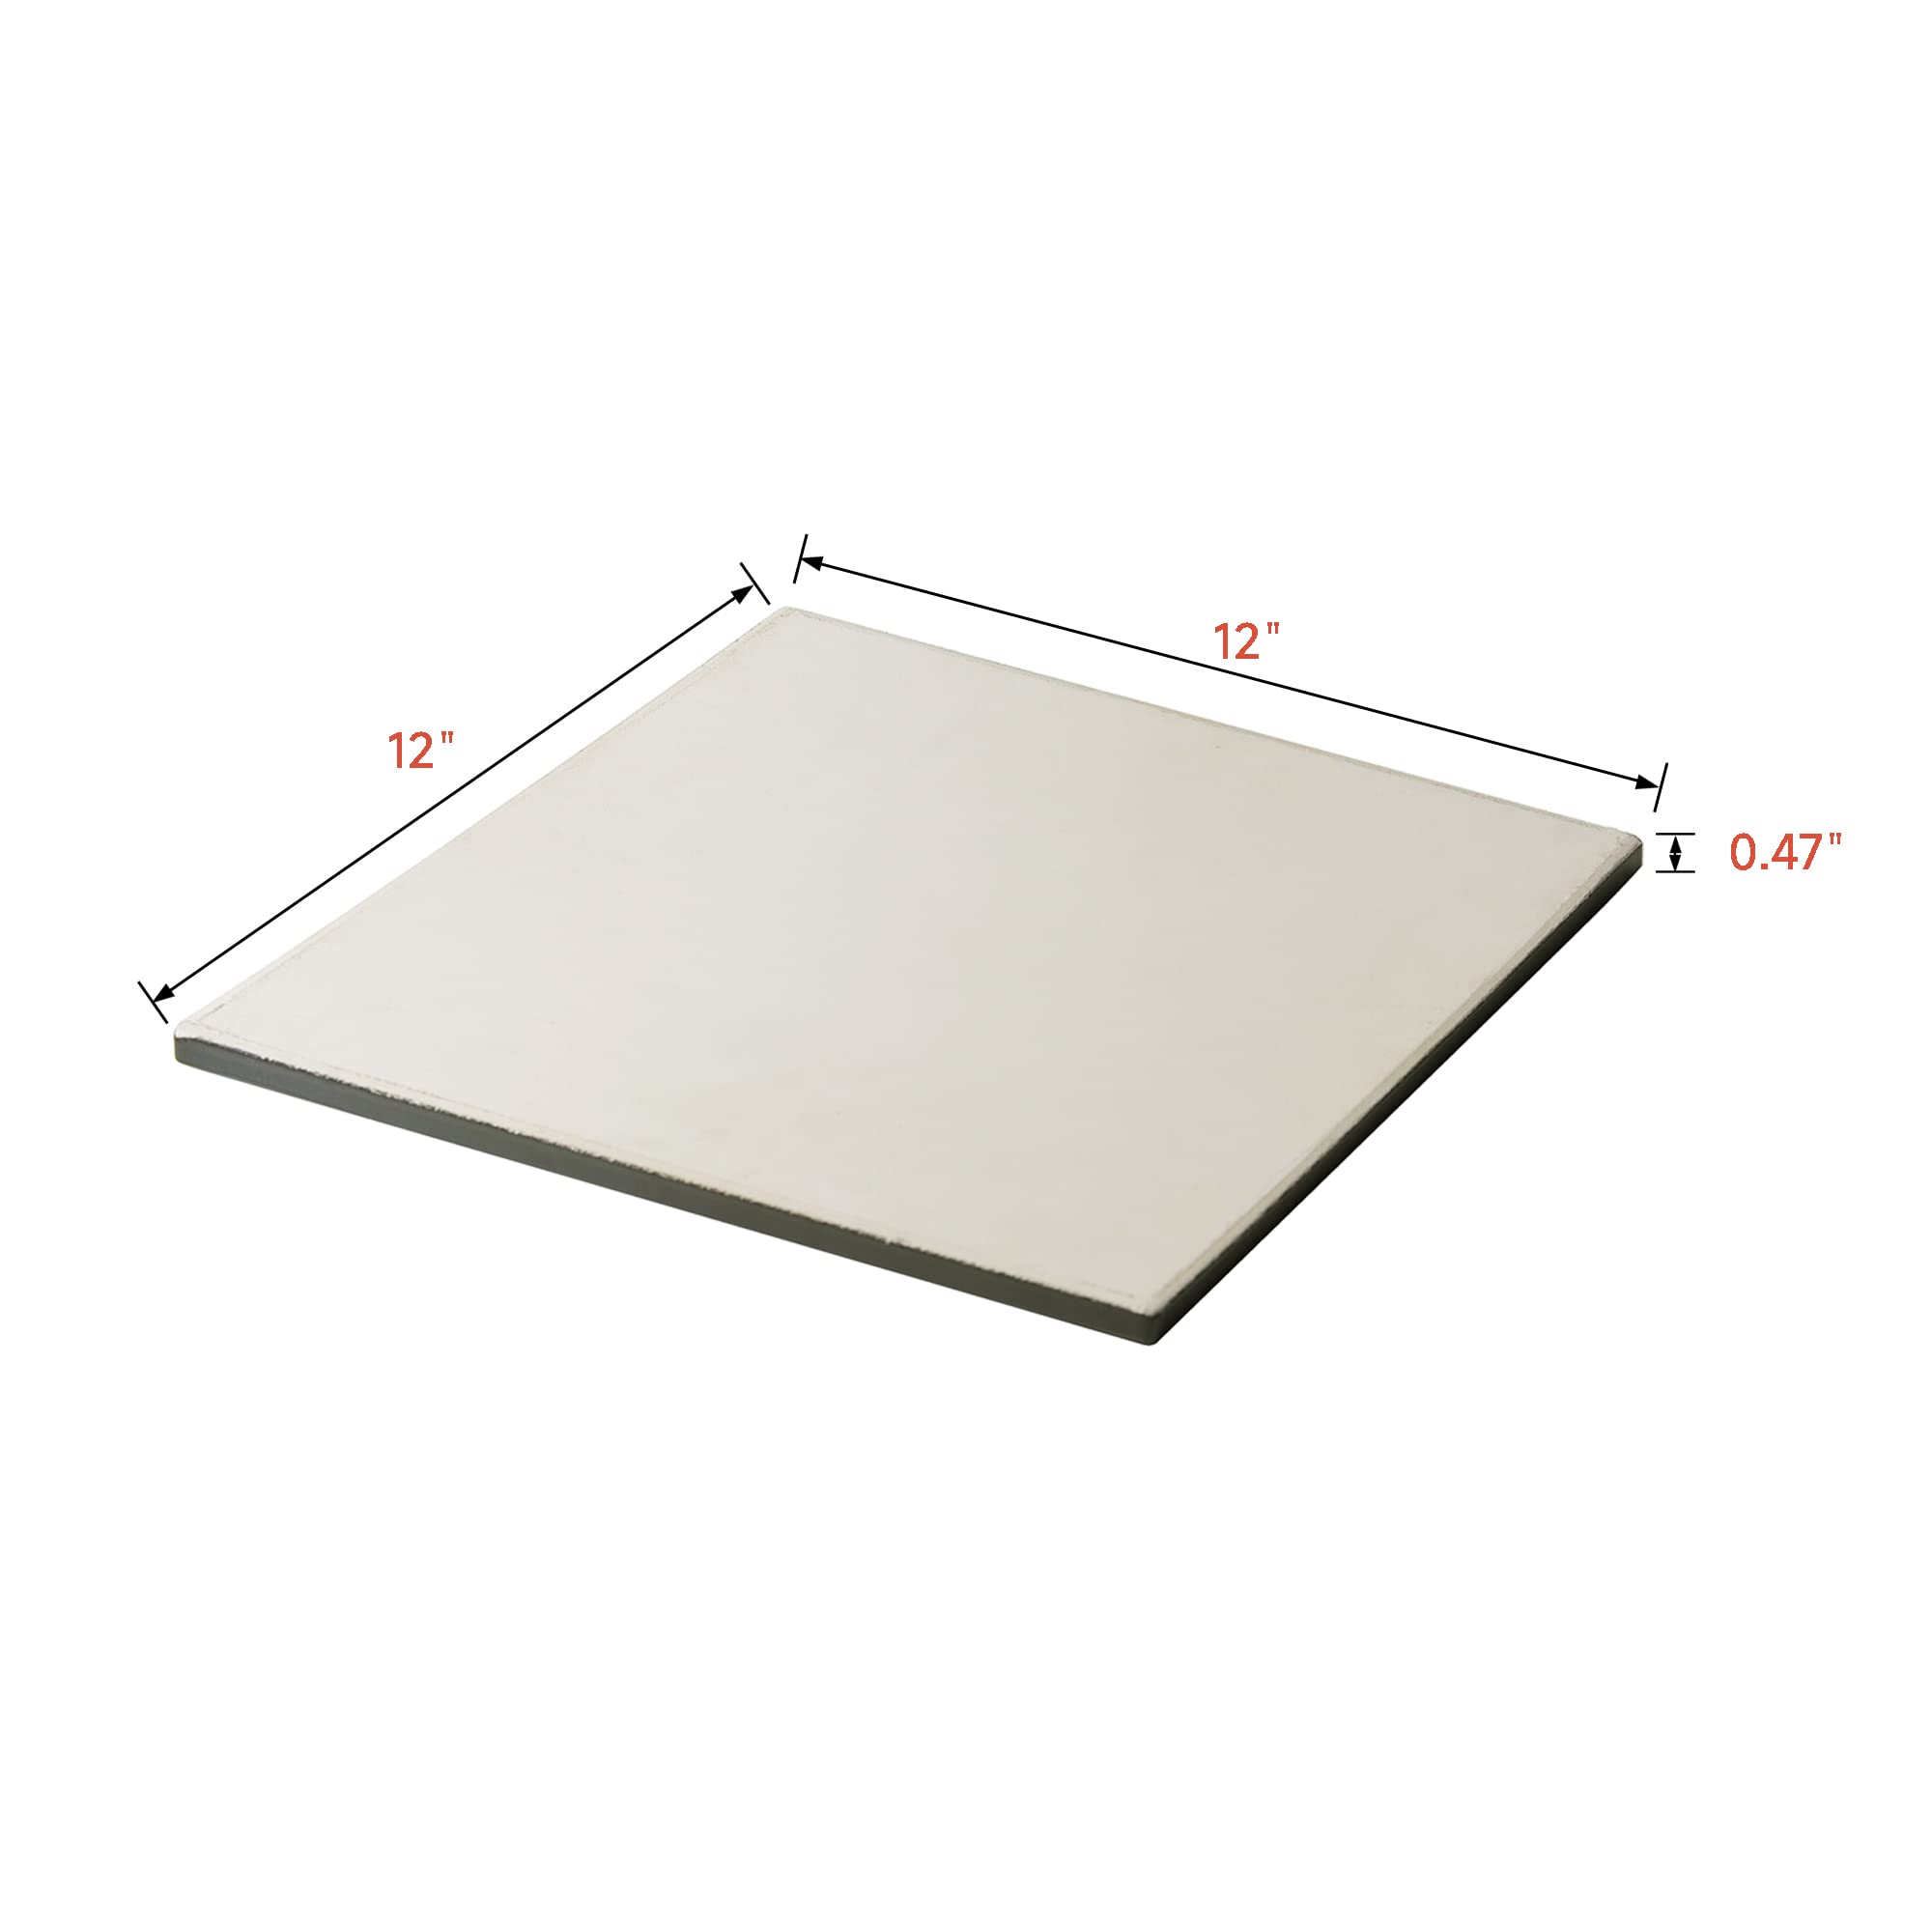 12" Square Double-Sided Pizza Stone for Oven and Grill